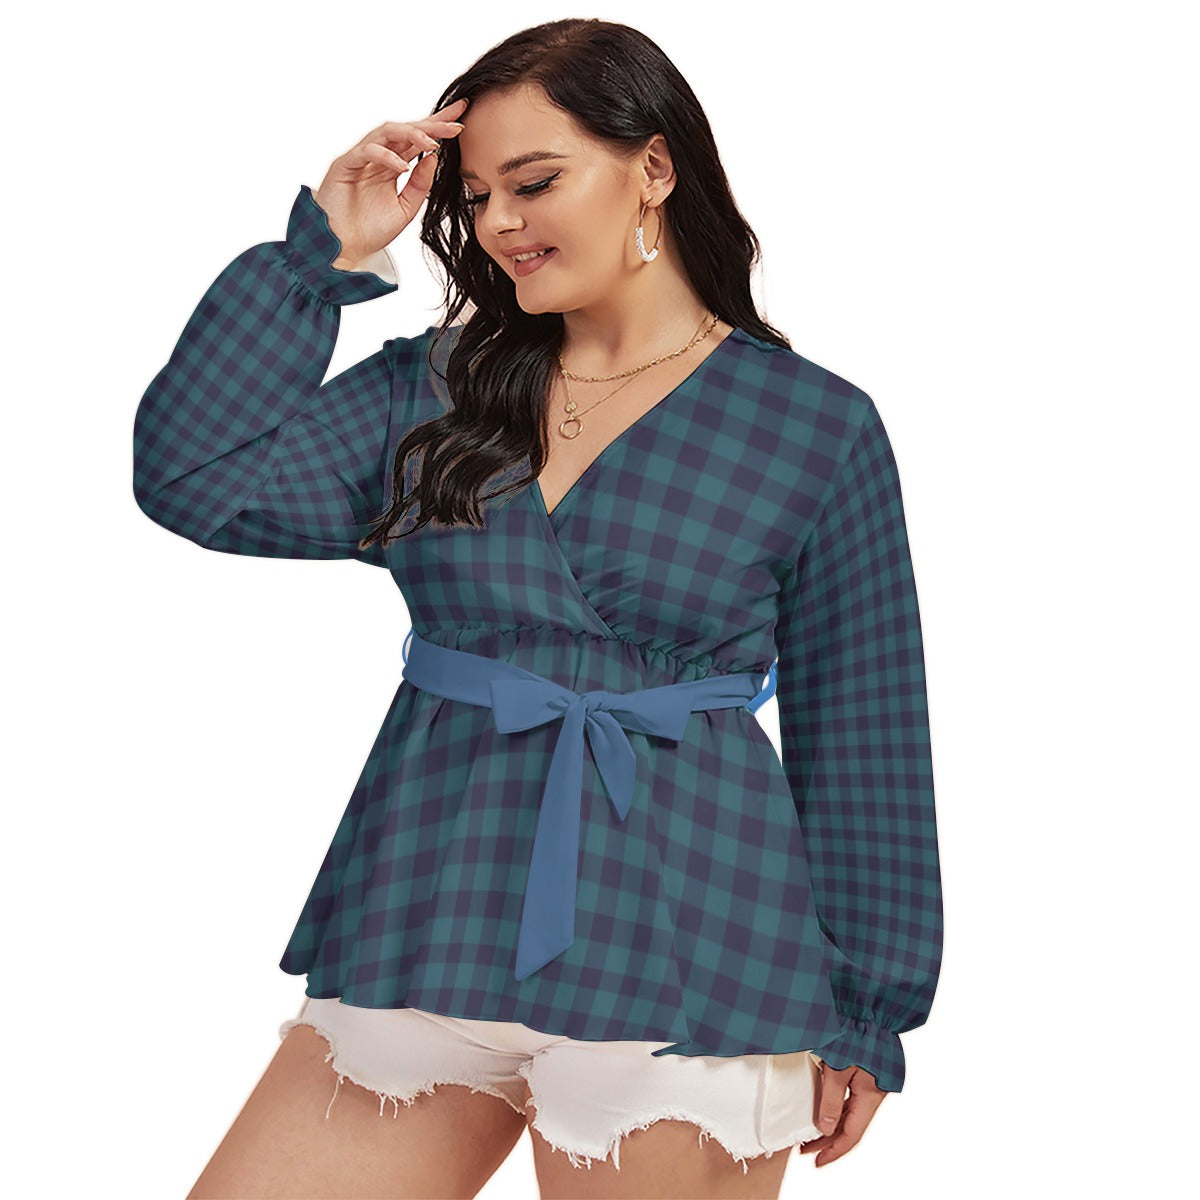 Blue Gingham All-Over Print Women's V-neck T-shirt With Waistband (Plus Size)